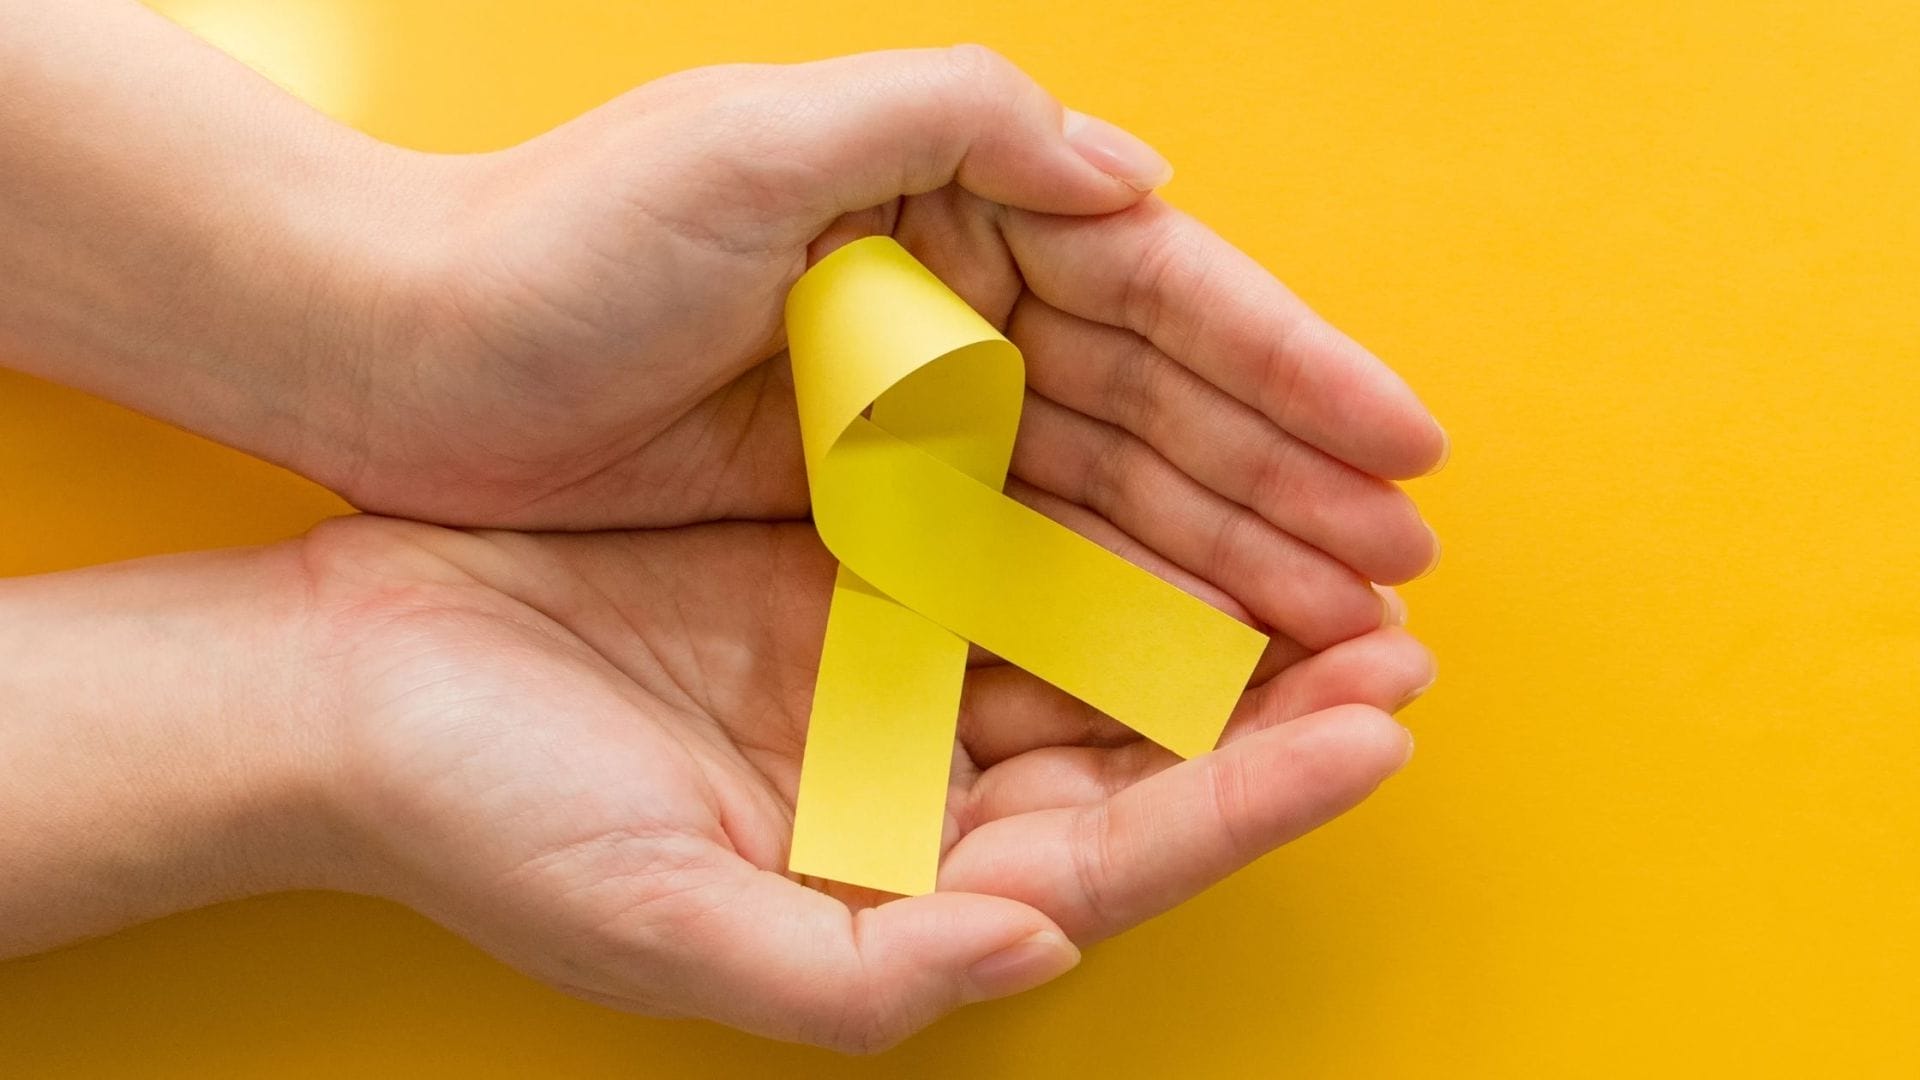 Hands carefully holding a yellow ribbon, symbolizing support for those managing sarcoma cancer treatment costs and raising awareness for the financial resources available.